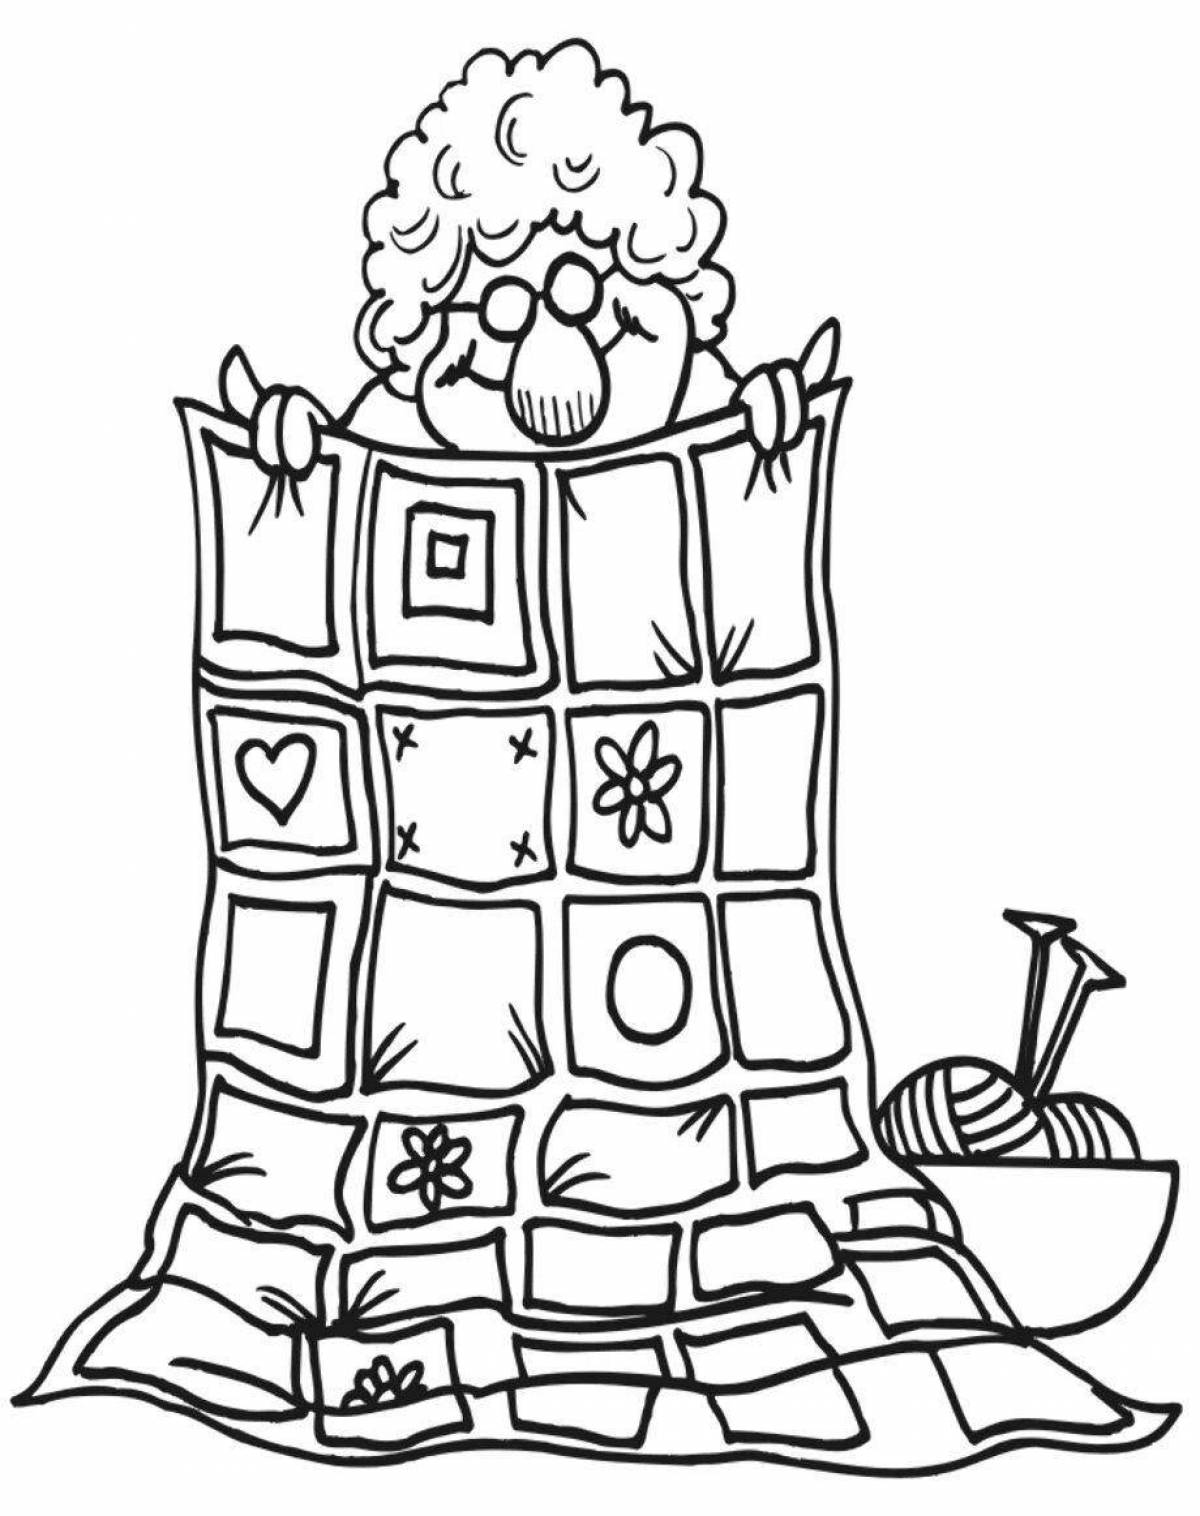 Sparkling blanket coloring page